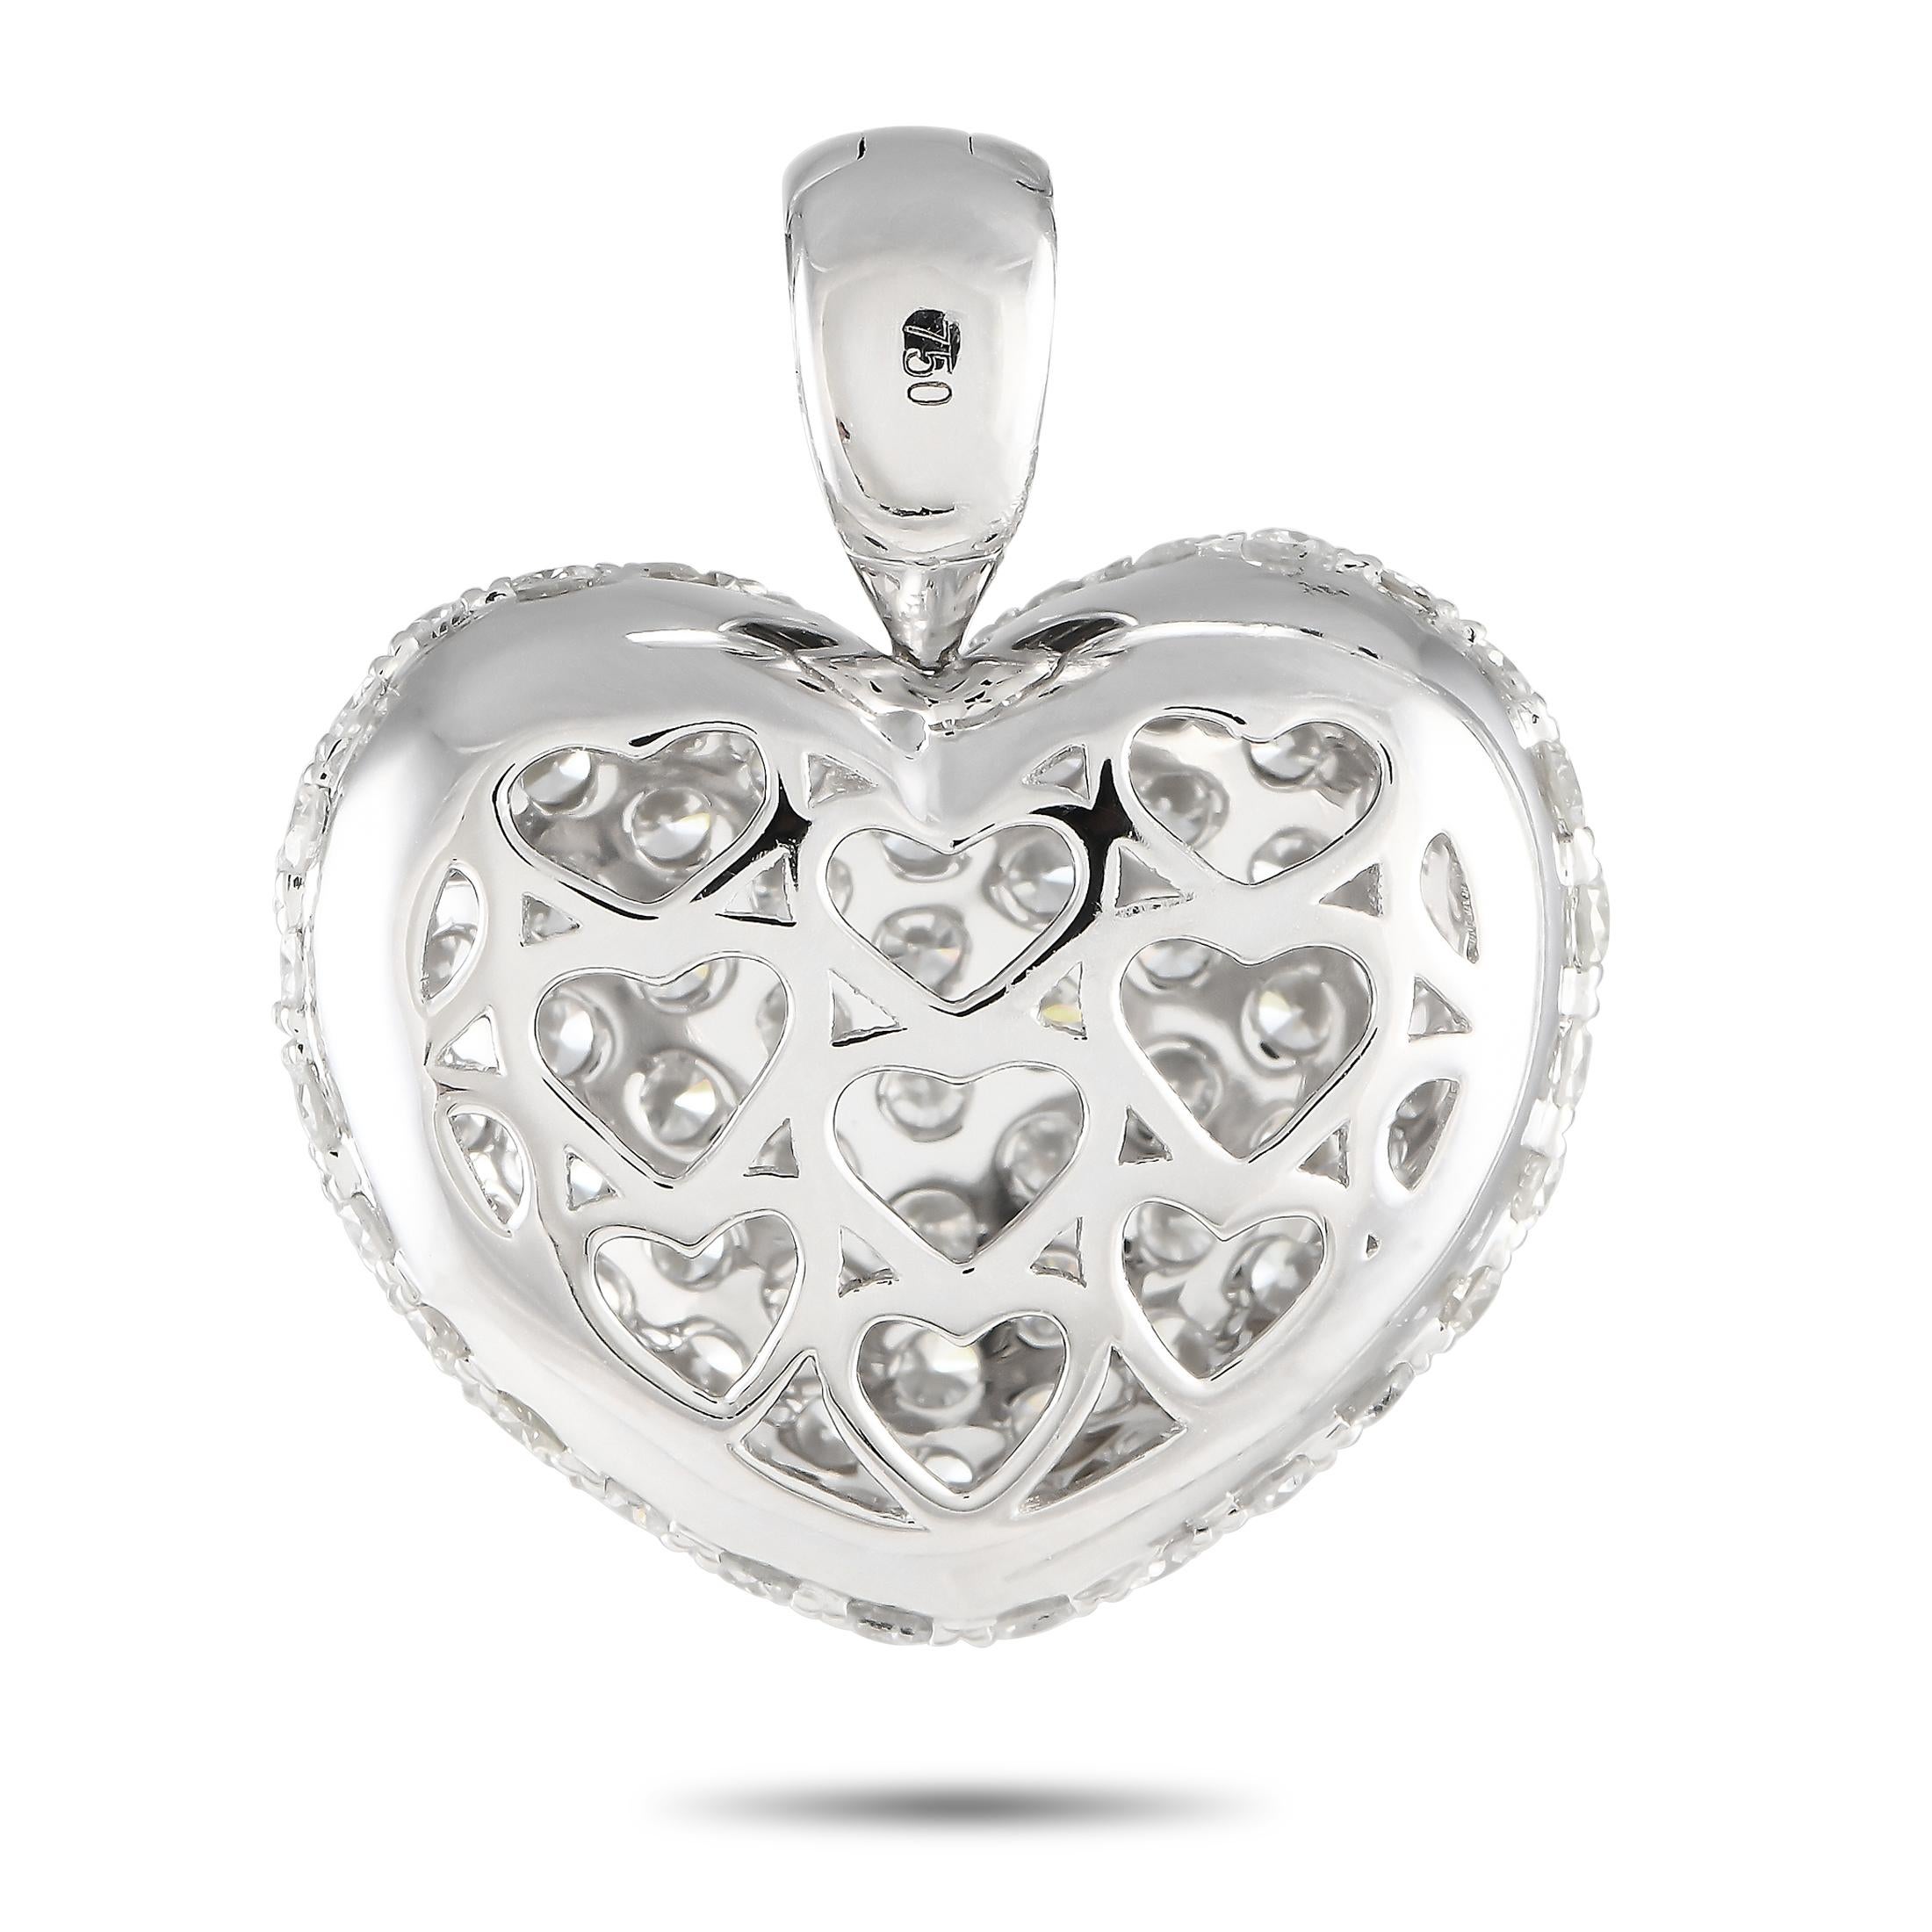 A rounded design makes this heart-shaped pendant an elegant addition to any length chain. Crafted from 18K white gold, it will effortlessly catch the light thanks to sparkling round-cut diamonds with a total weight of 3.0 carats. It measures 0.85